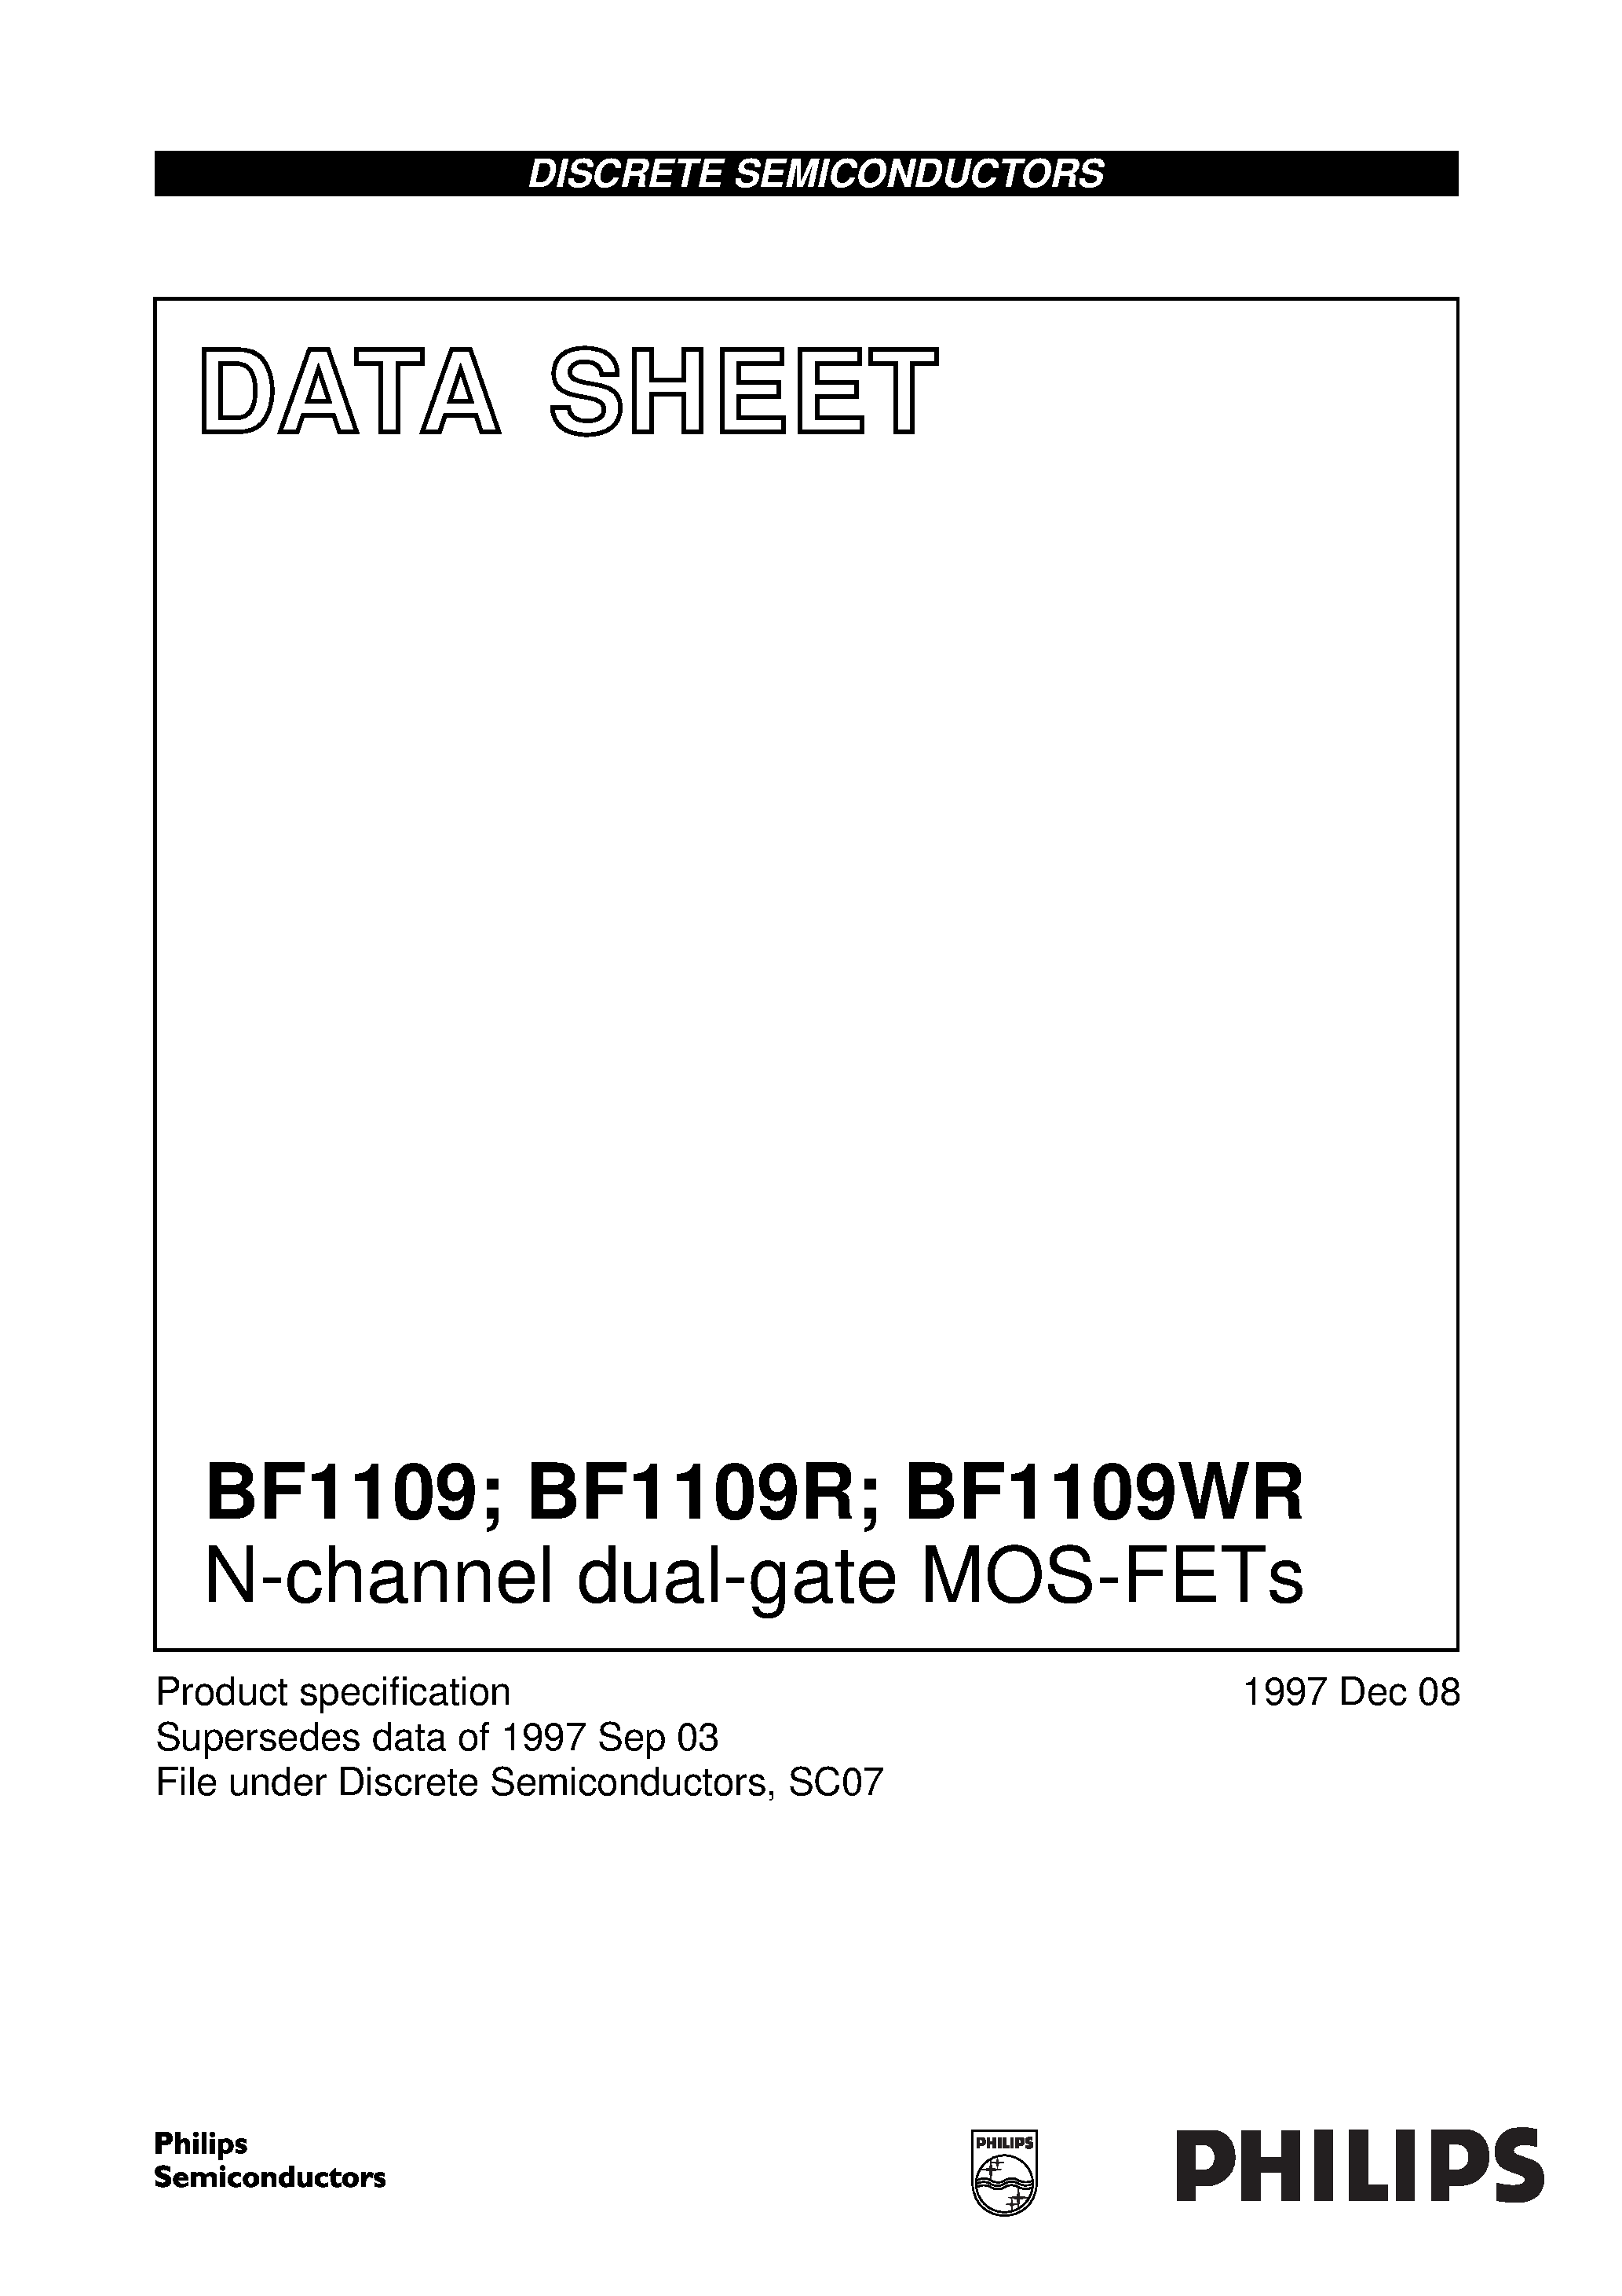 Datasheet BF1109WR - N-channel dual-gate MOS-FETs page 1